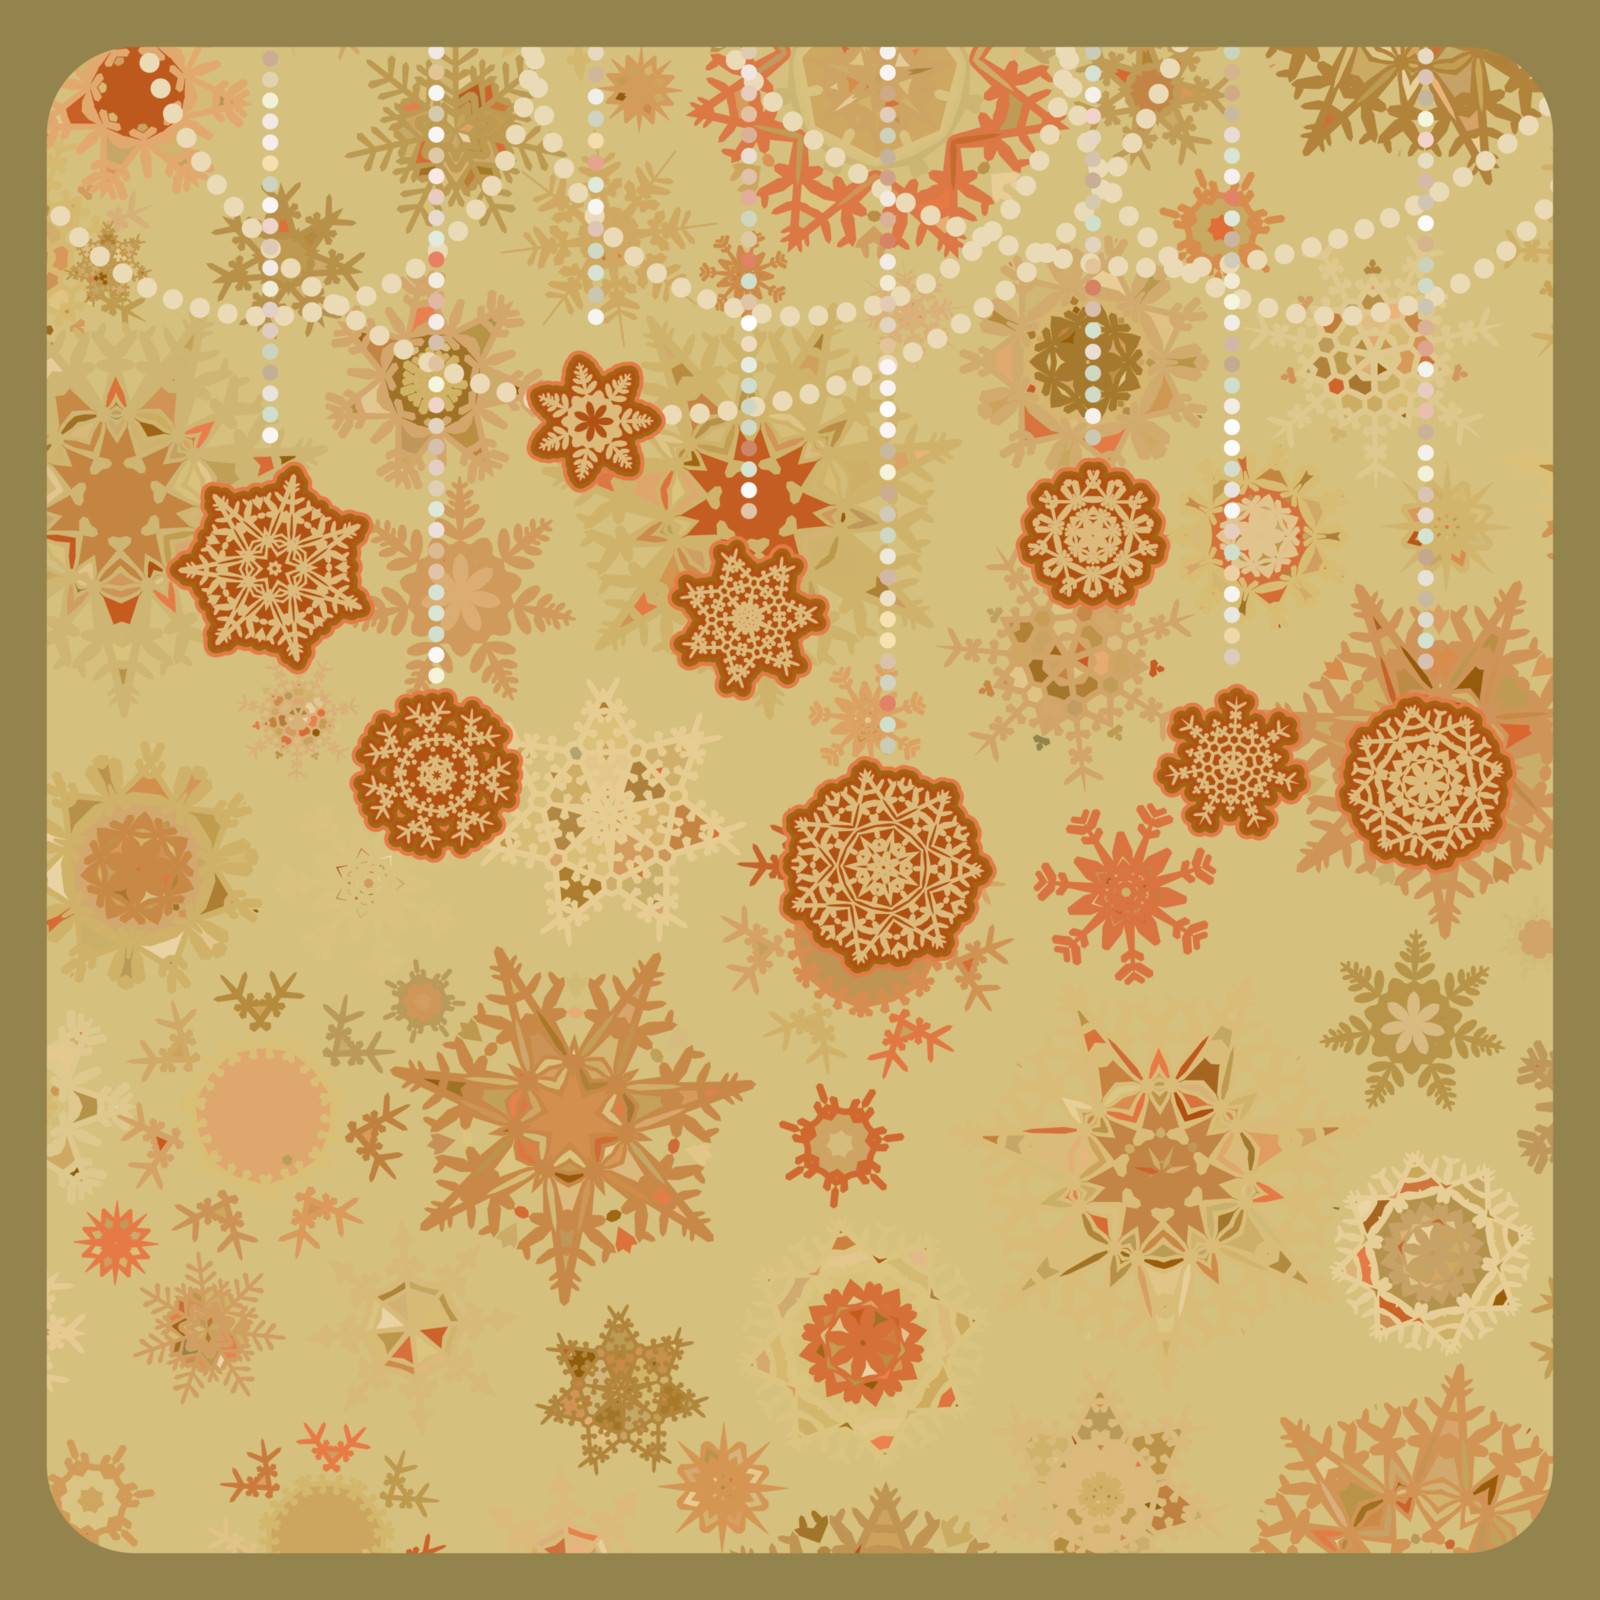 Colorful retro snowflake pattern. EPS 8 vector file included